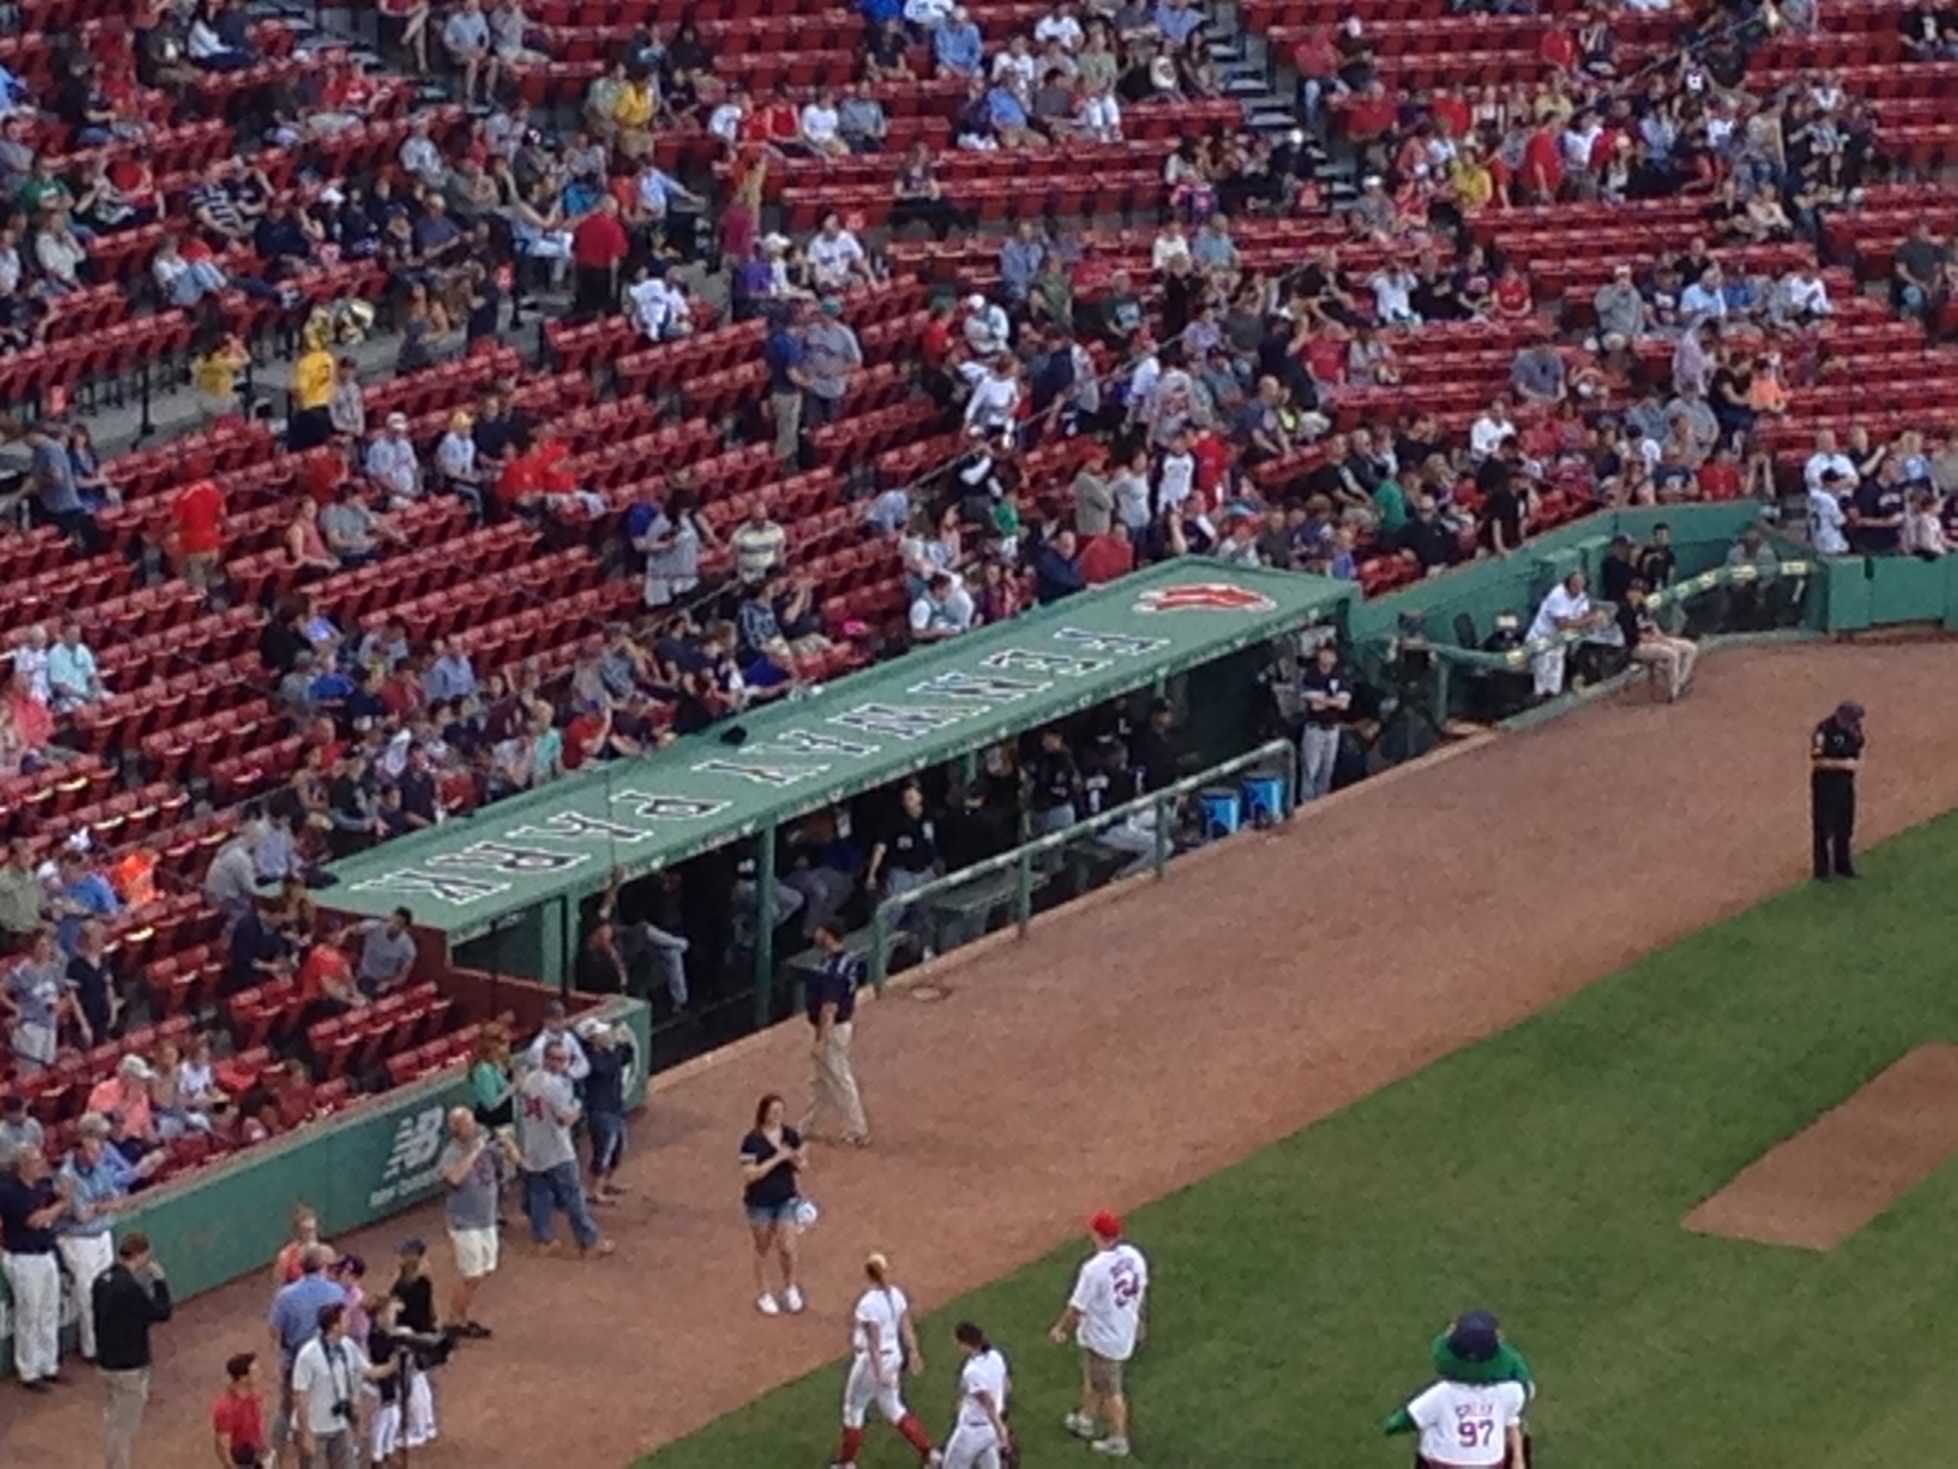 fenway park visitor dugout